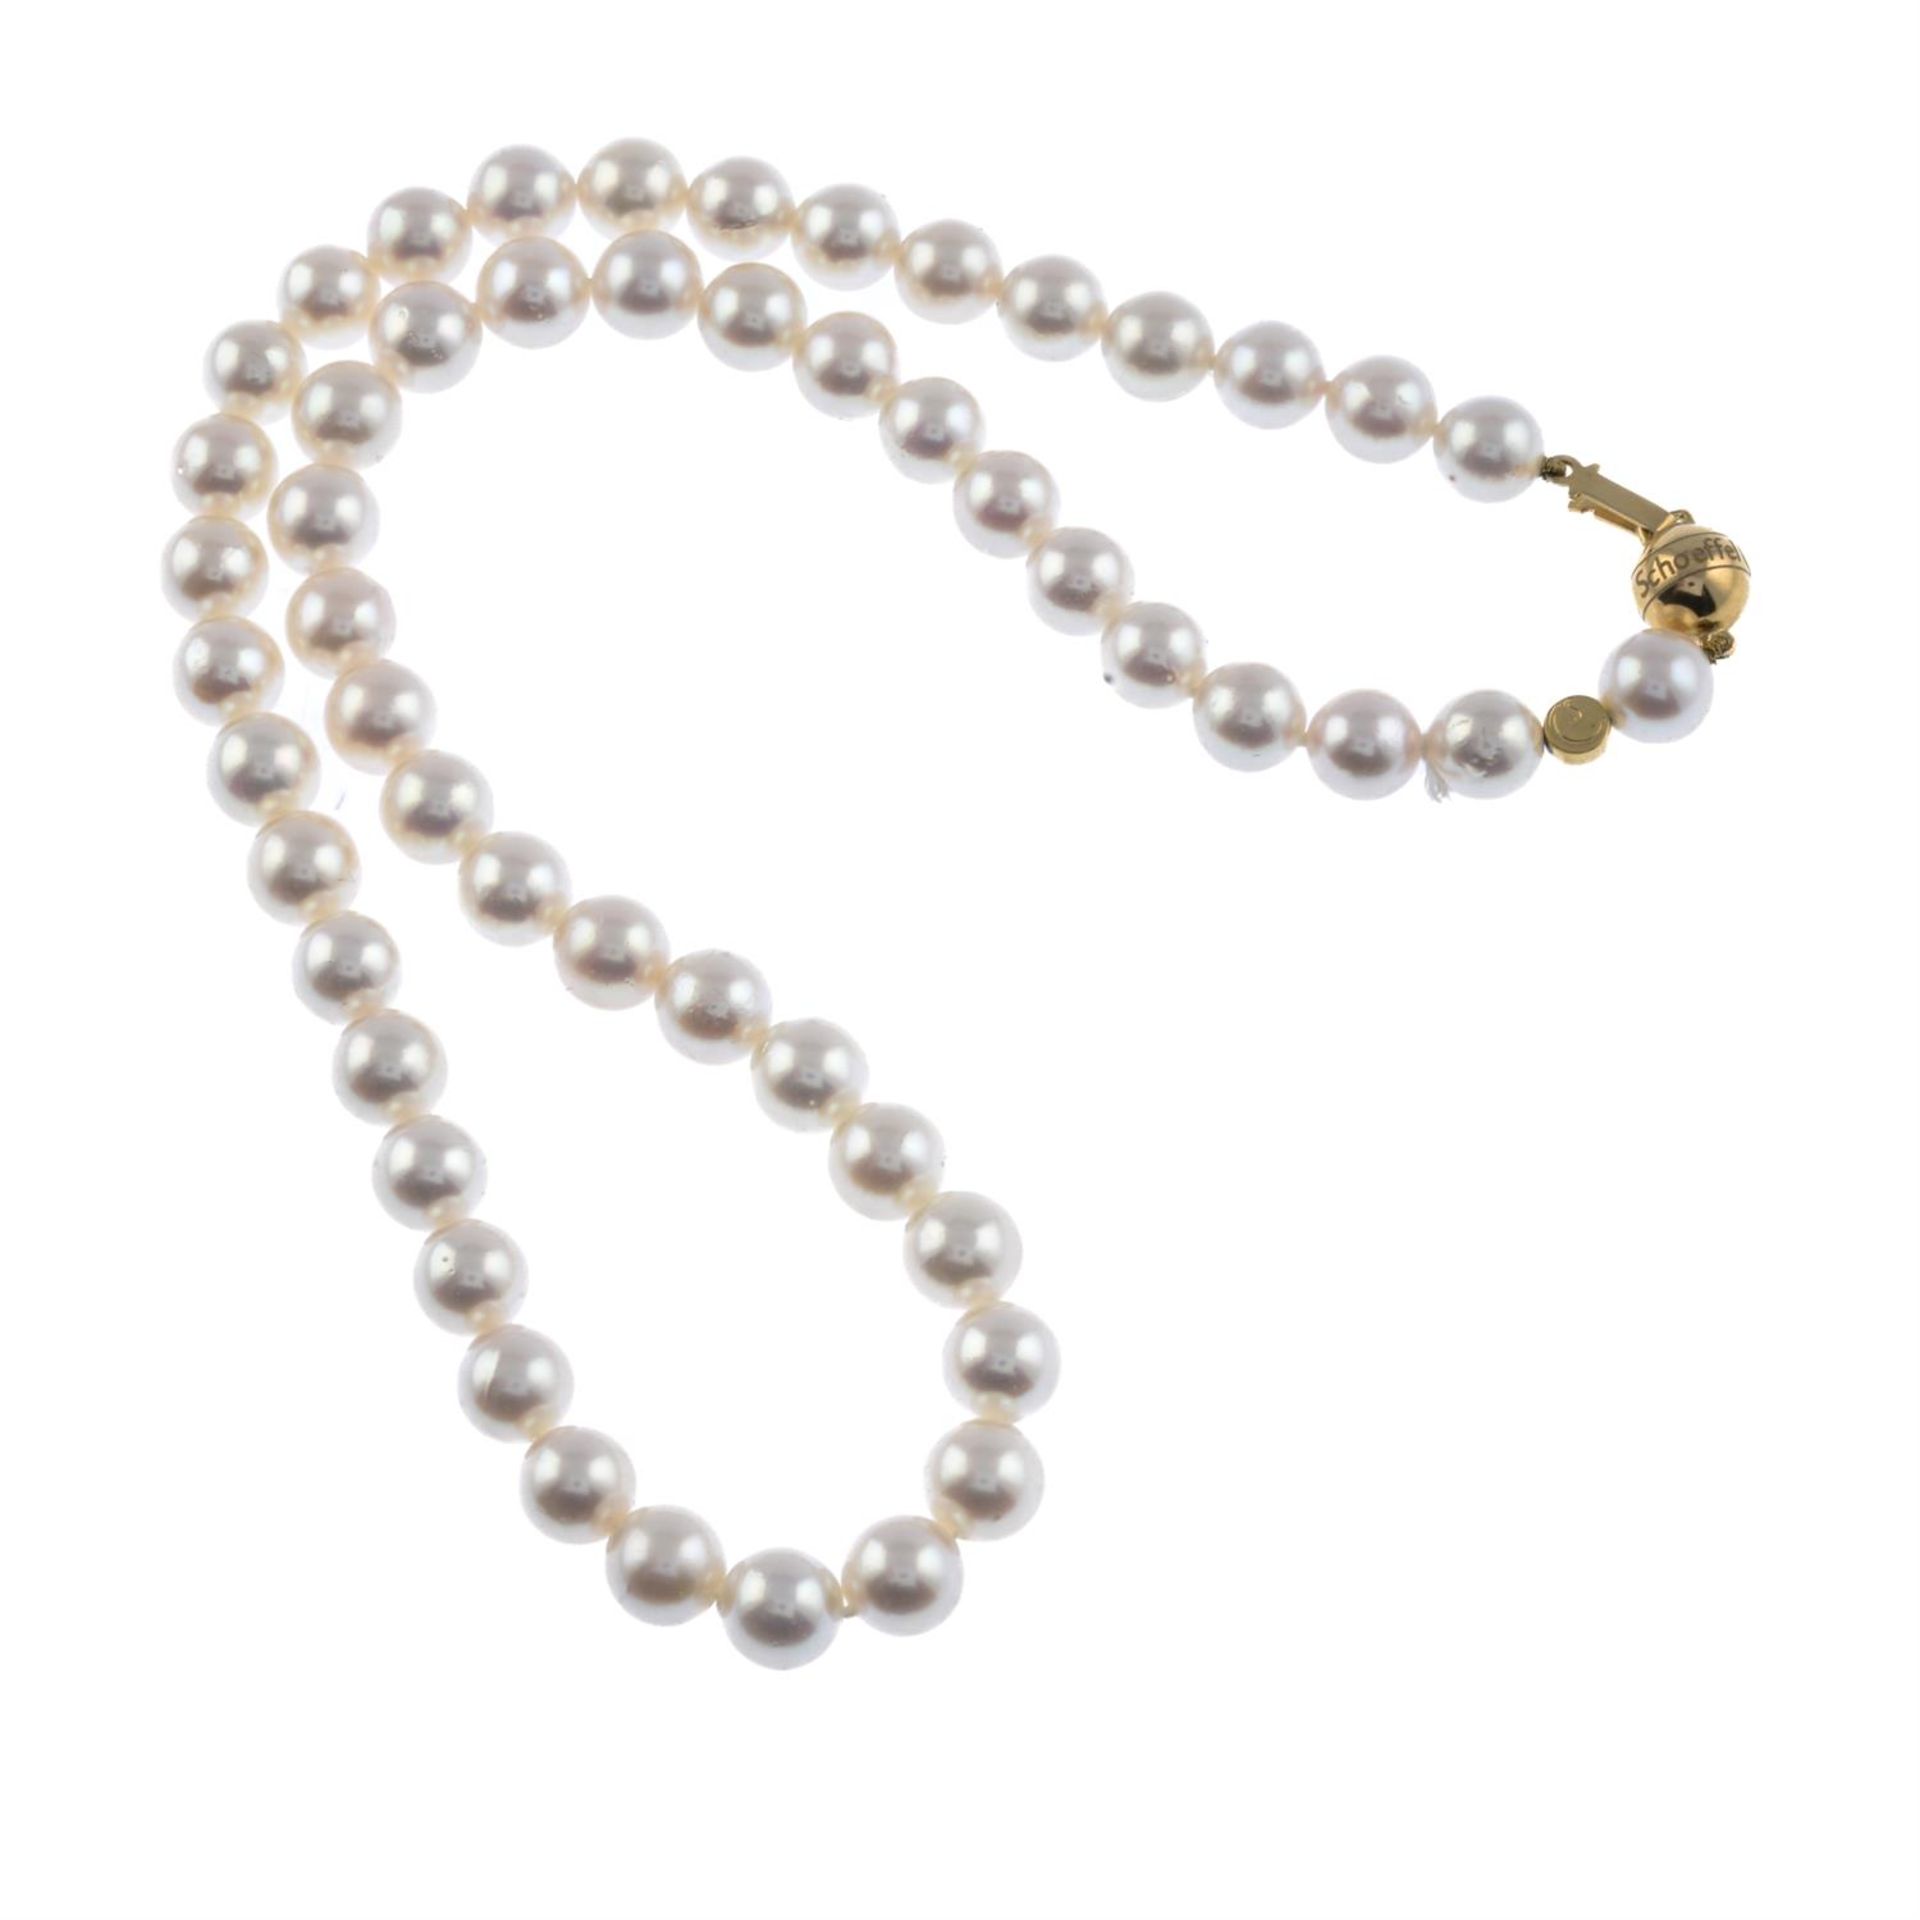 Cultured pearl single-strand necklace, by Schoeffel - Image 2 of 2